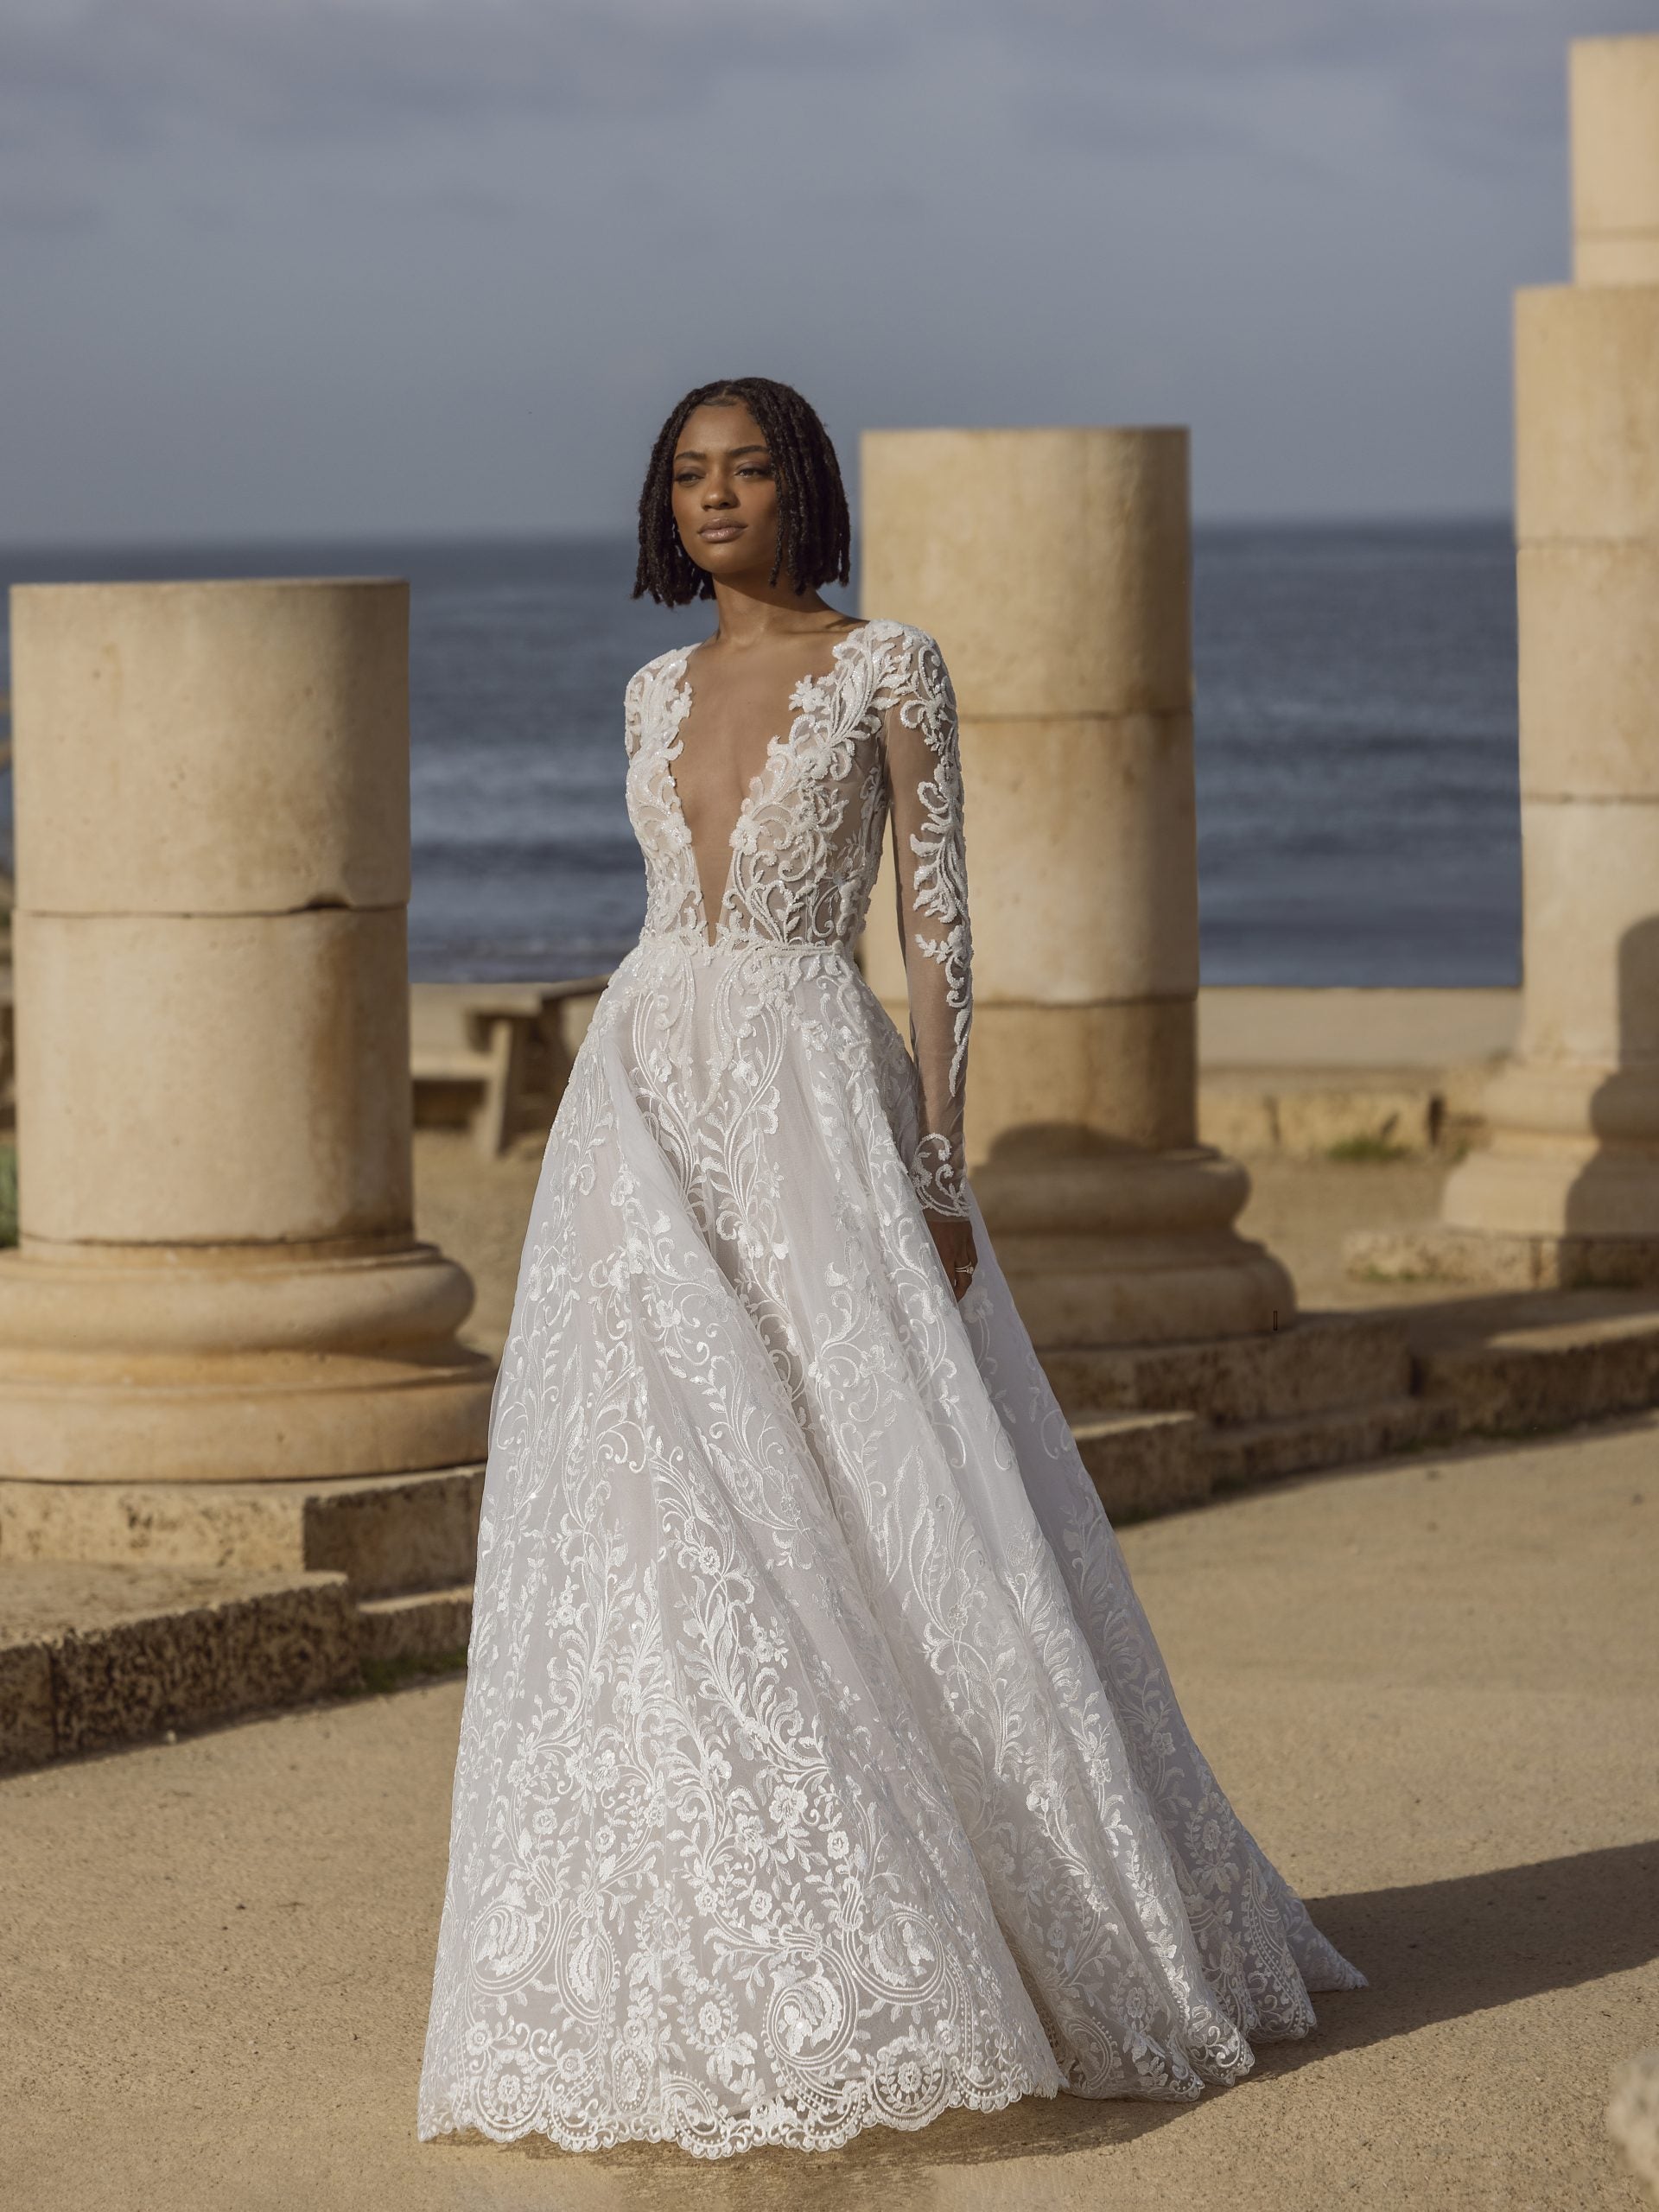 Long Sleeve Lace Ball Gown Wedding Dress With Open Back by Love by Pnina Tornai - Image 1